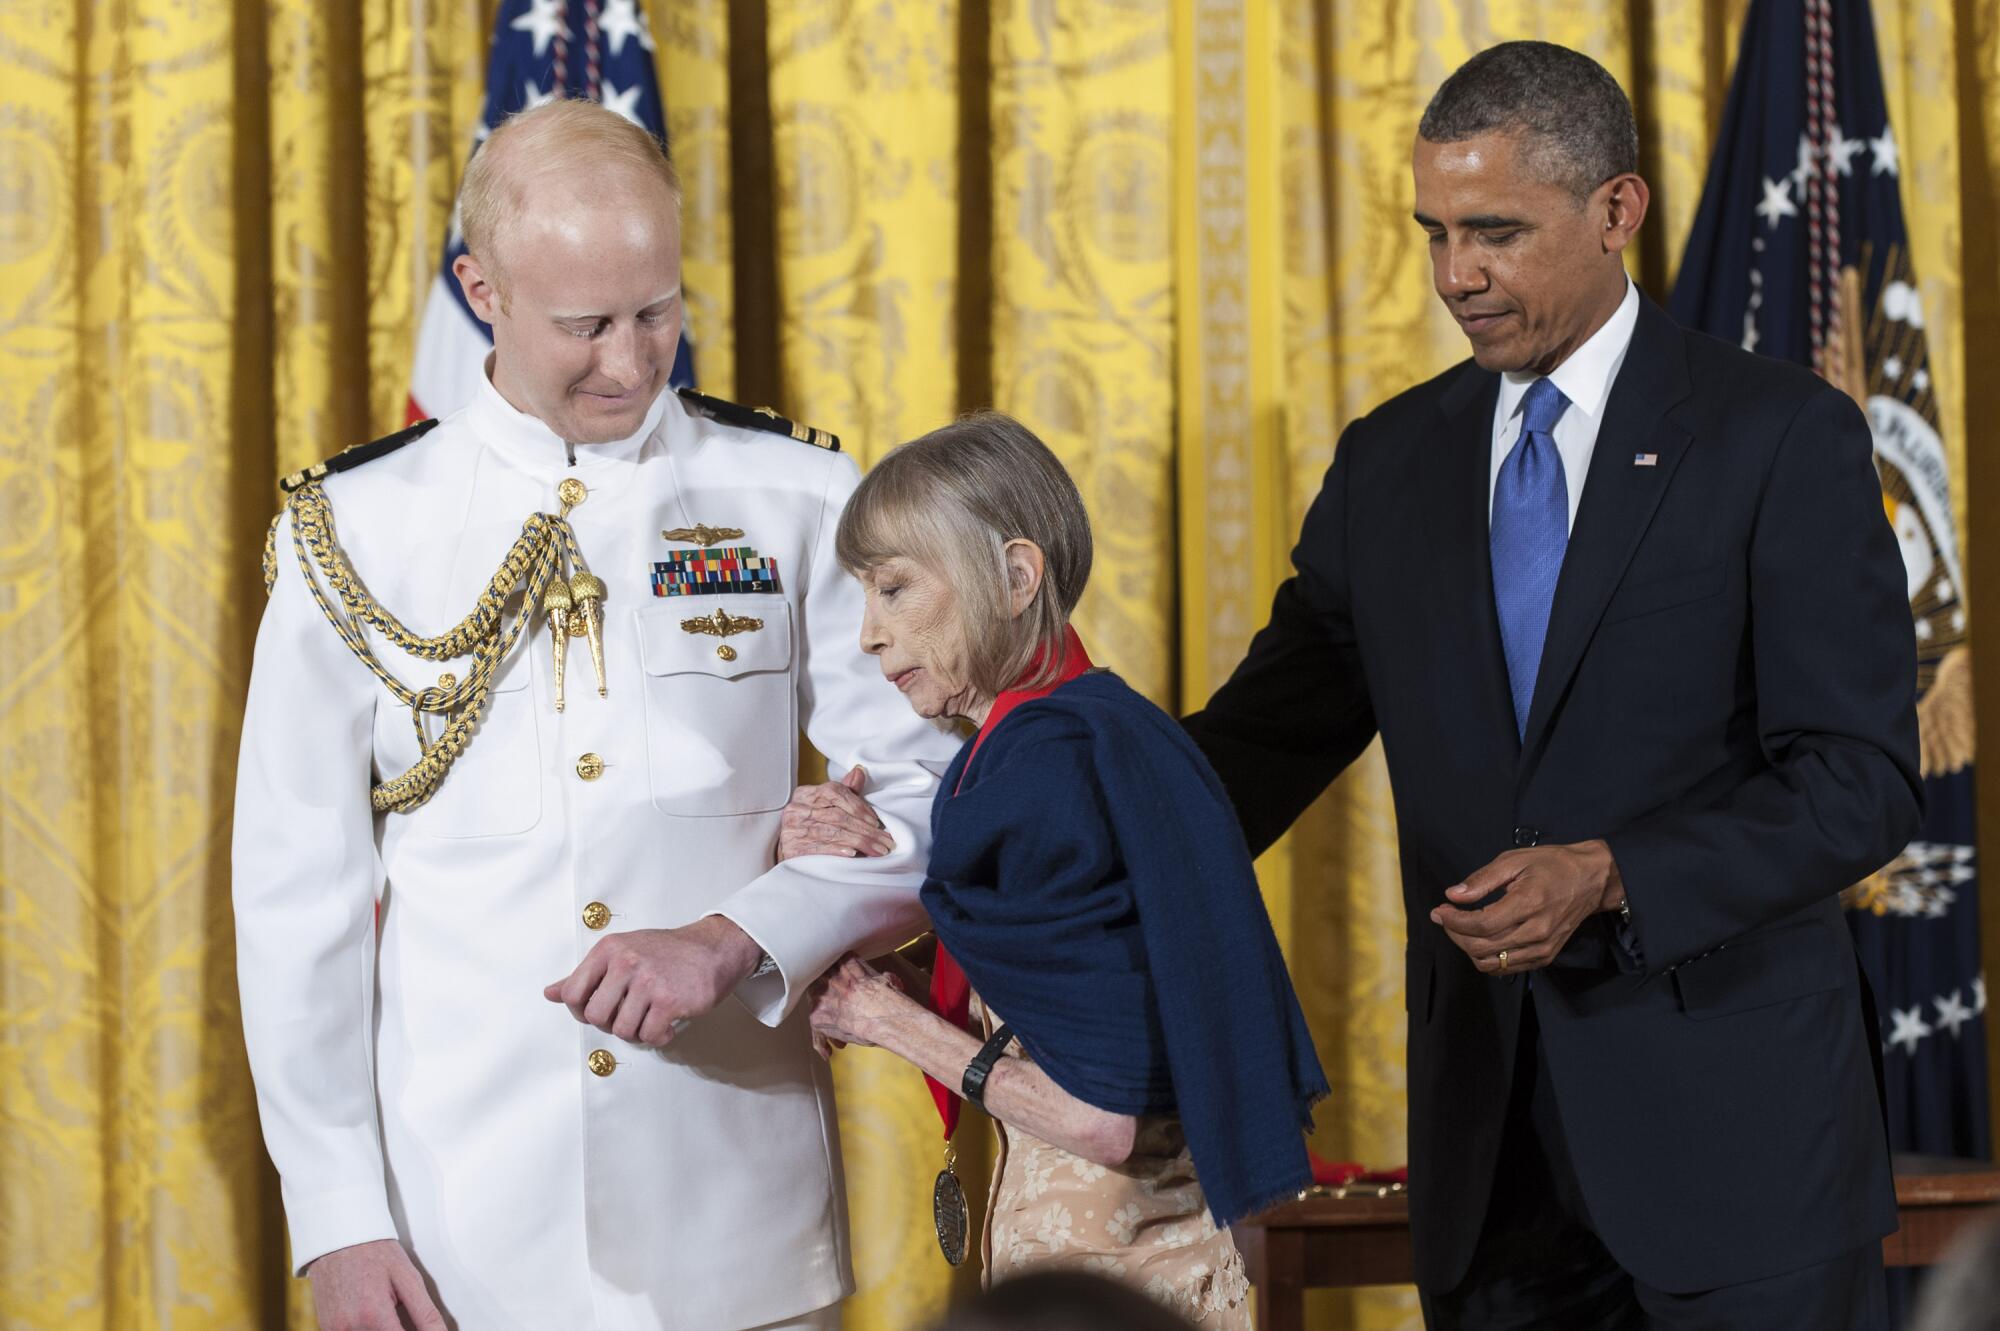 A uniformed official escorts Joan Didion as President Obama looks on.